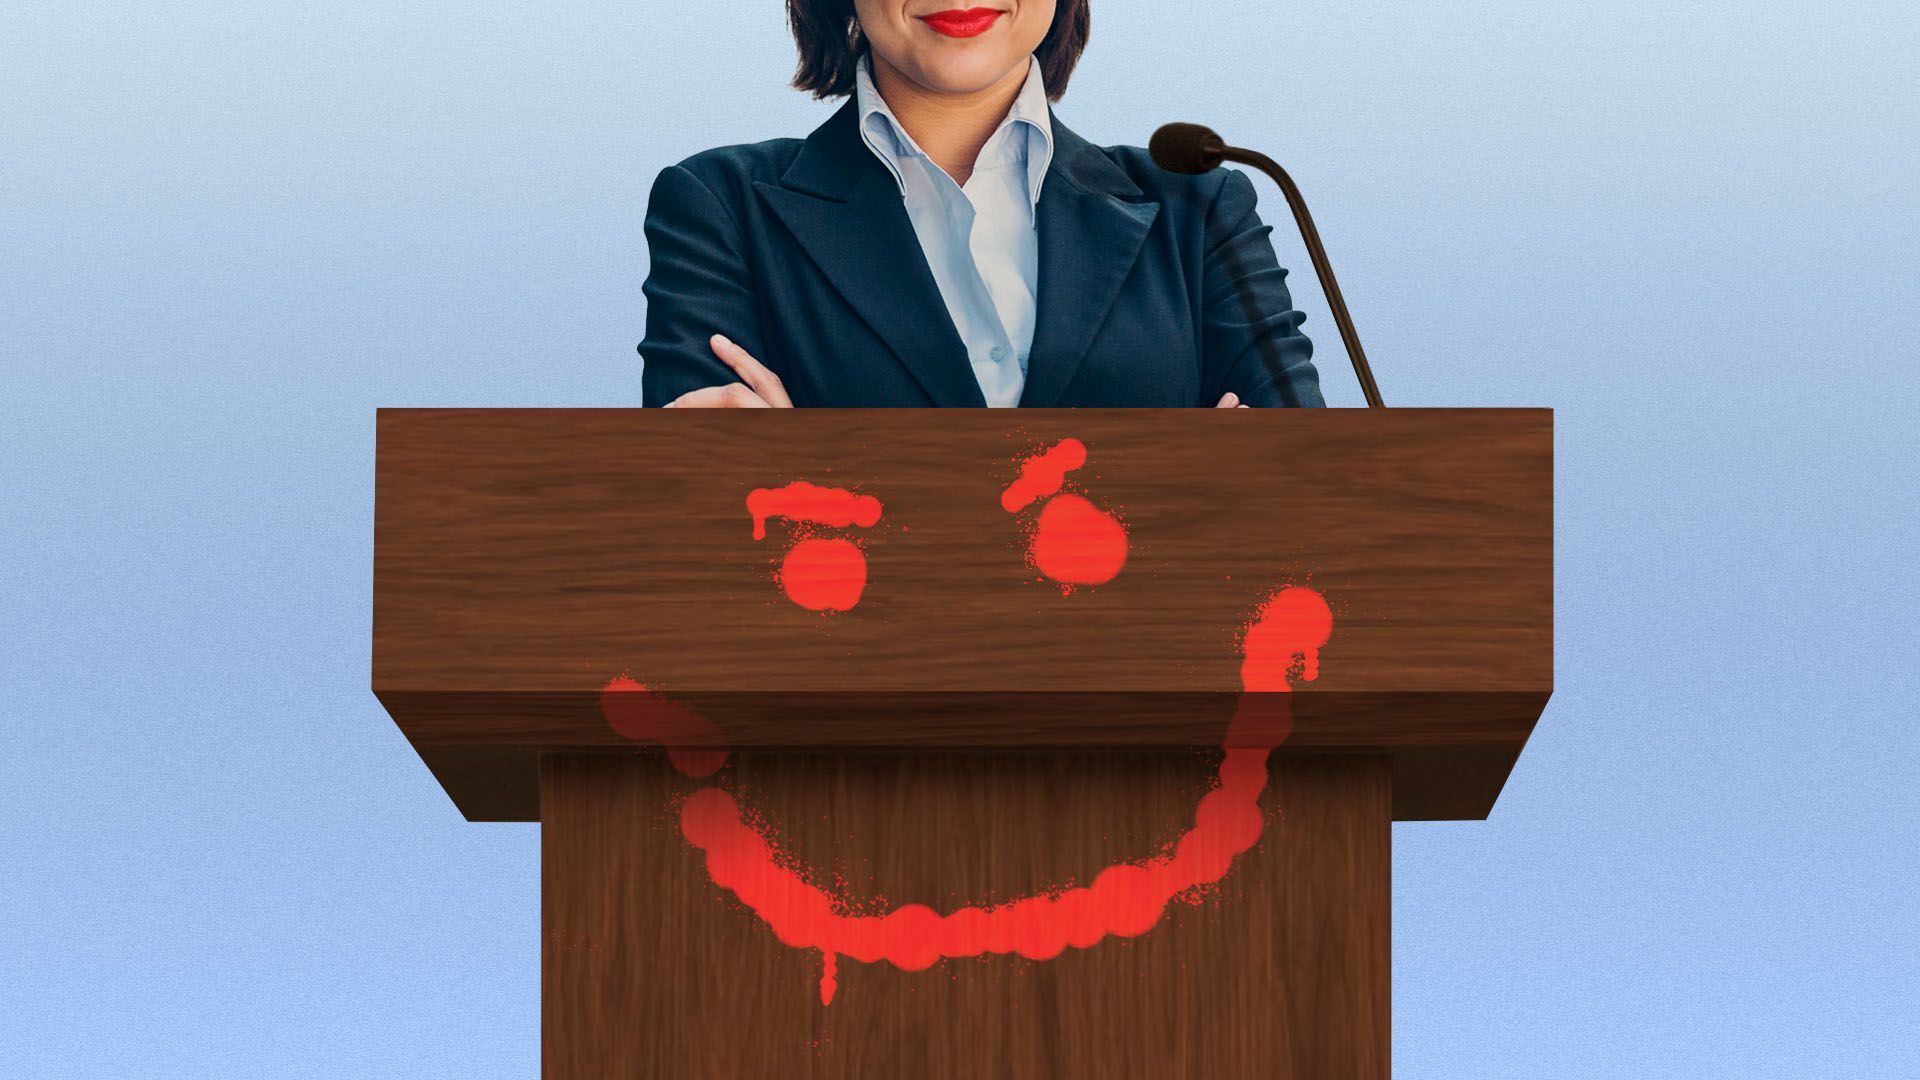 Illustration of a woman standing at a podium with a smiley face spray painted on the front of it